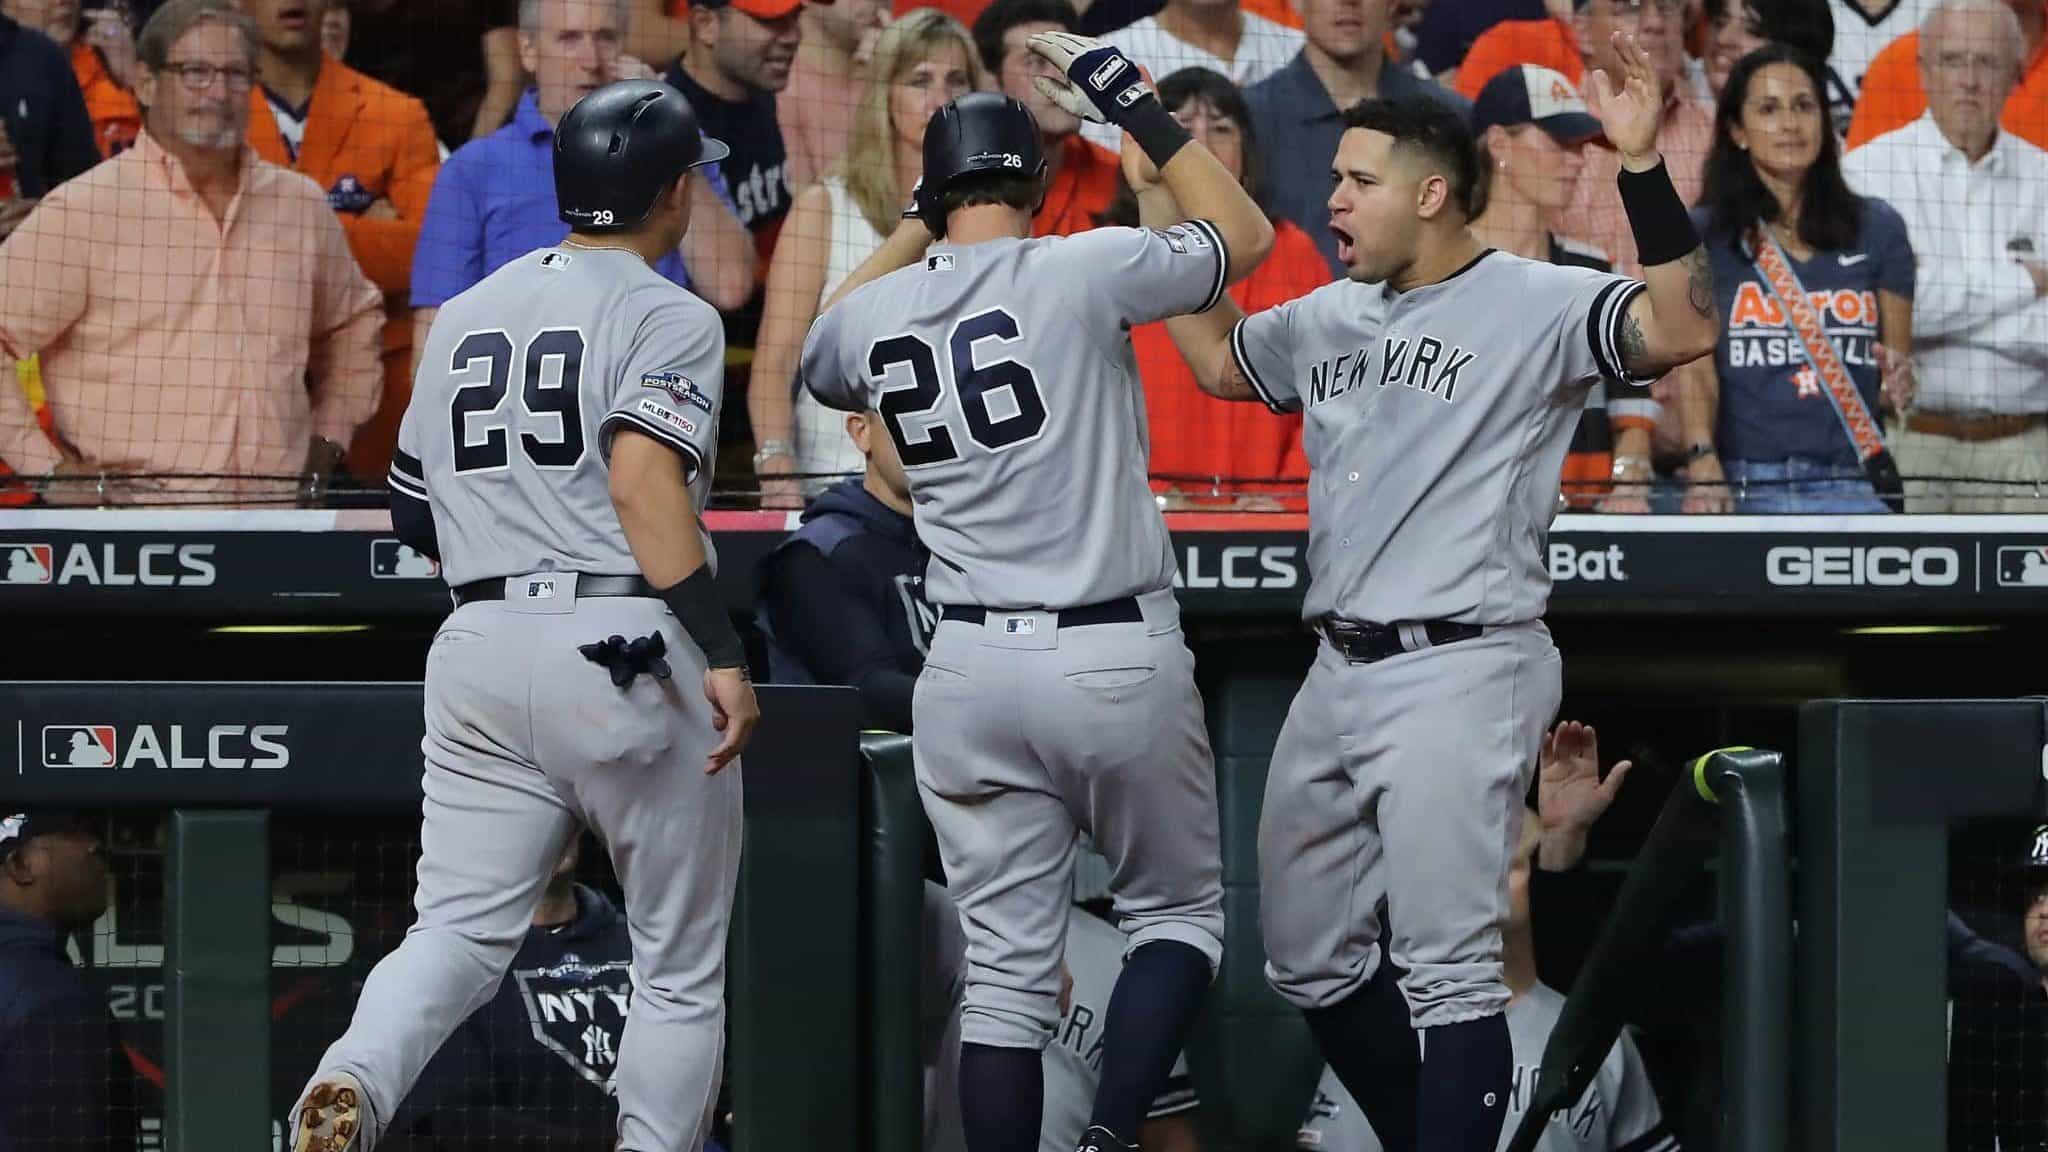 HOUSTON, TEXAS - OCTOBER 19: DJ LeMahieu #26 of the New York Yankees is congratulated by his teammates Gio Urshela #29 and Gary Sanchez #24 after his game-tying two-run home run against the Houston Astros during the ninth inning in game six of the American League Championship Series at Minute Maid Park on October 19, 2019 in Houston, Texas.